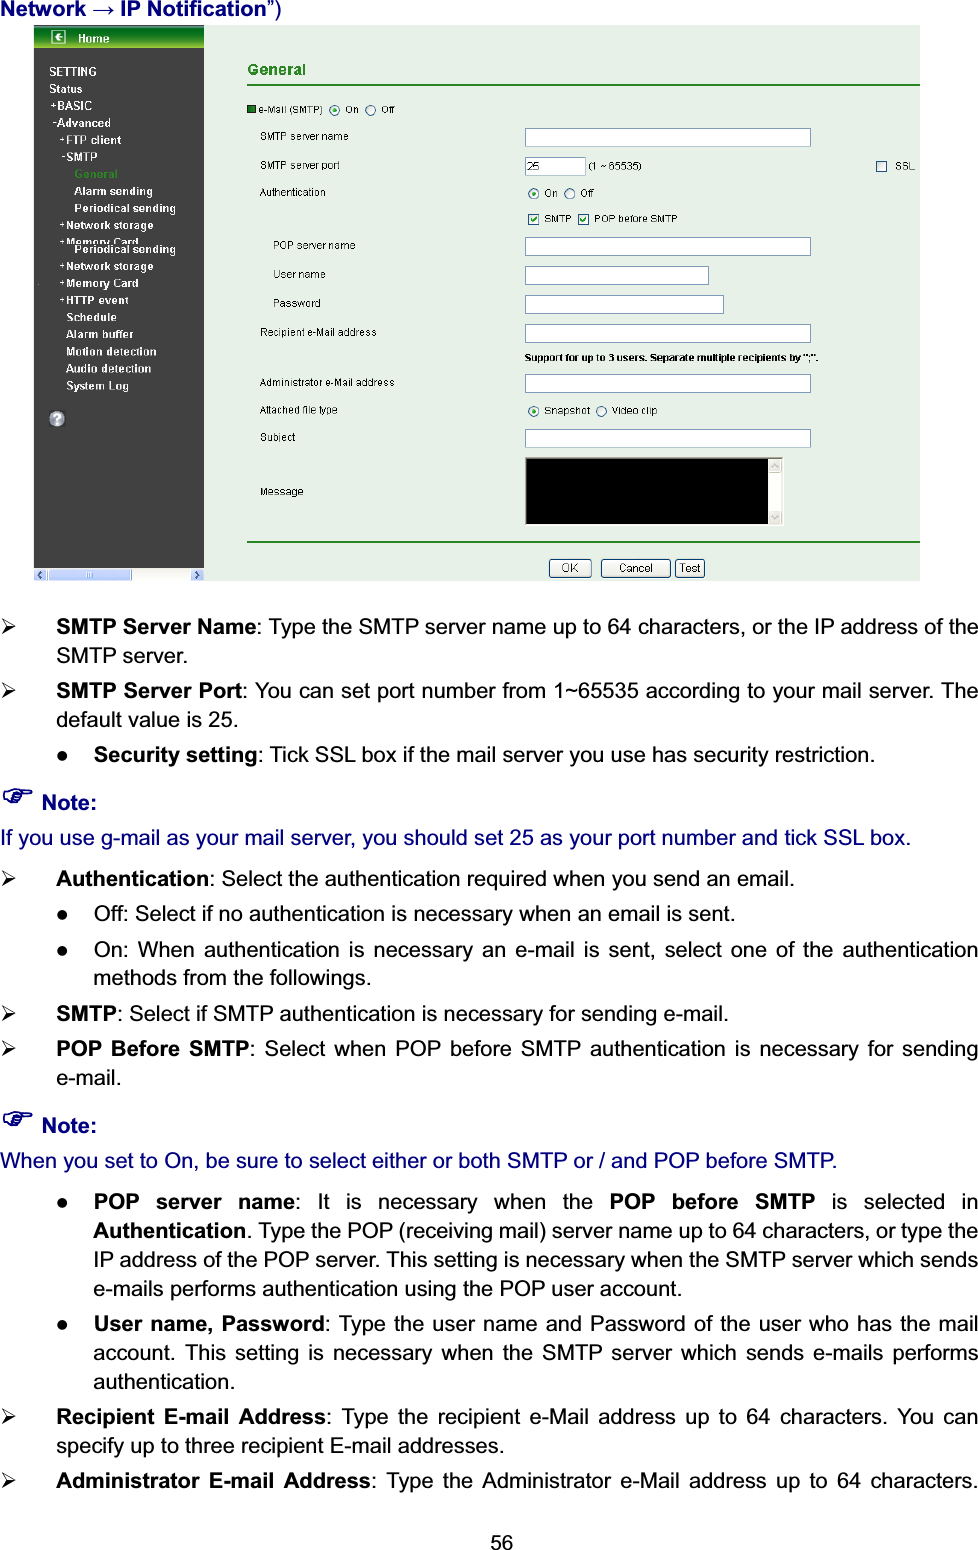   56Network  IP Notification”)  ¾ SMTP Server Name: Type the SMTP server name up to 64 characters, or the IP address of the SMTP server. ¾ SMTP Server Port: You can set port number from 1~65535 according to your mail server. The default value is 25. z Security setting: Tick SSL box if the mail server you use has security restriction. ) Note: If you use g-mail as your mail server, you should set 25 as your port number and tick SSL box. ¾ Authentication: Select the authentication required when you send an email.   z Off: Select if no authentication is necessary when an email is sent. z On: When authentication is necessary an e-mail is sent, select one of the authentication methods from the followings.   ¾ SMTP: Select if SMTP authentication is necessary for sending e-mail. ¾ POP Before SMTP: Select when POP before SMTP authentication is necessary for sending e-mail. ) Note: When you set to On, be sure to select either or both SMTP or / and POP before SMTP.   z POP server name: It is necessary when the POP before SMTP is selected in Authentication. Type the POP (receiving mail) server name up to 64 characters, or type the IP address of the POP server. This setting is necessary when the SMTP server which sends e-mails performs authentication using the POP user account.   z User name, Password: Type the user name and Password of the user who has the mail account. This setting is necessary when the SMTP server which sends e-mails performs authentication. ¾ Recipient E-mail Address: Type the recipient e-Mail address up to 64 characters. You can specify up to three recipient E-mail addresses. ¾ Administrator E-mail Address: Type the Administrator e-Mail address up to 64 characters. 